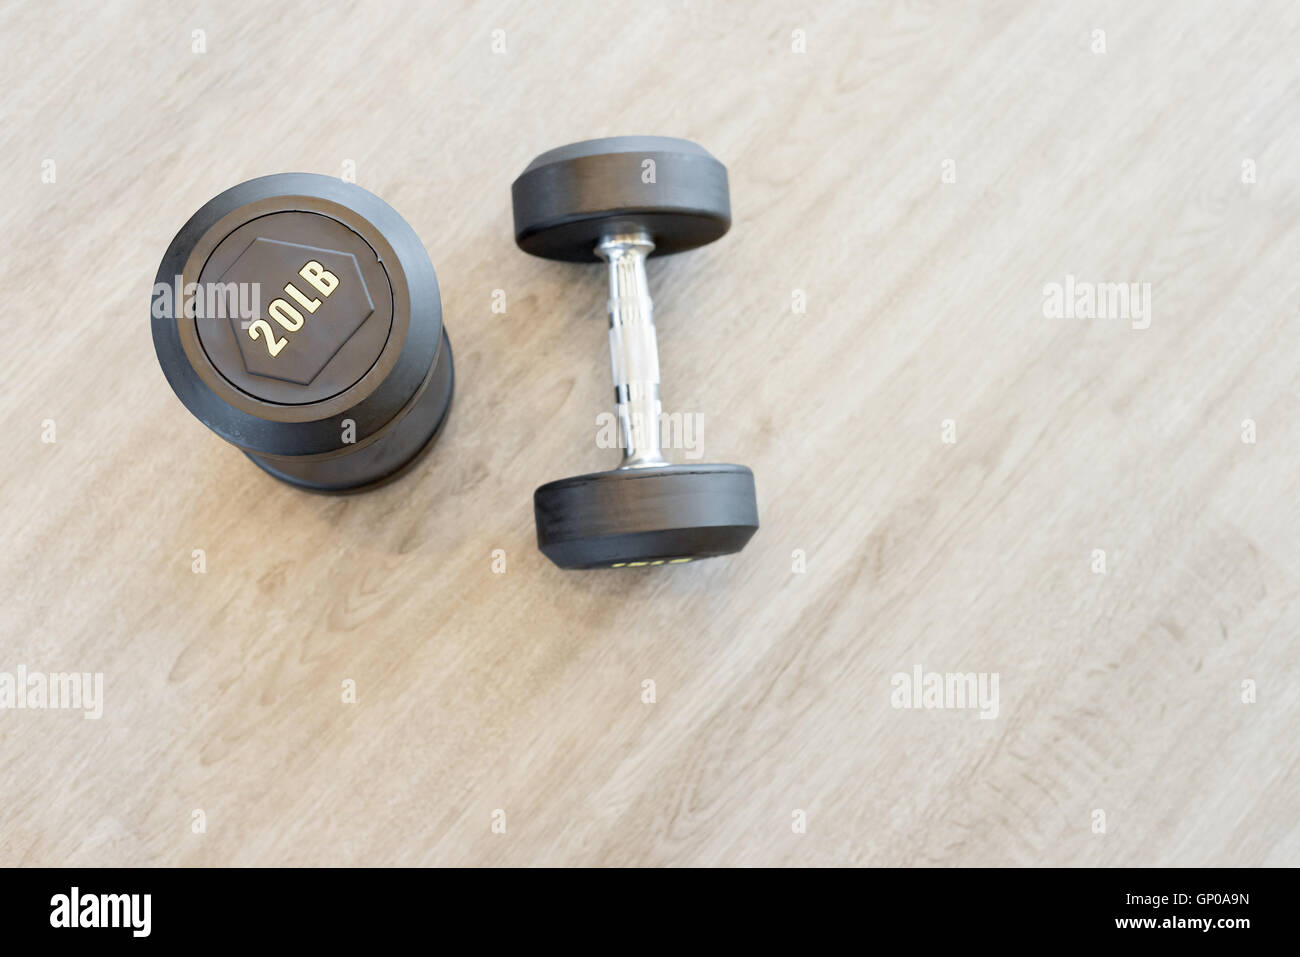 Two dumbbells on the floor in a hall Stock Photo